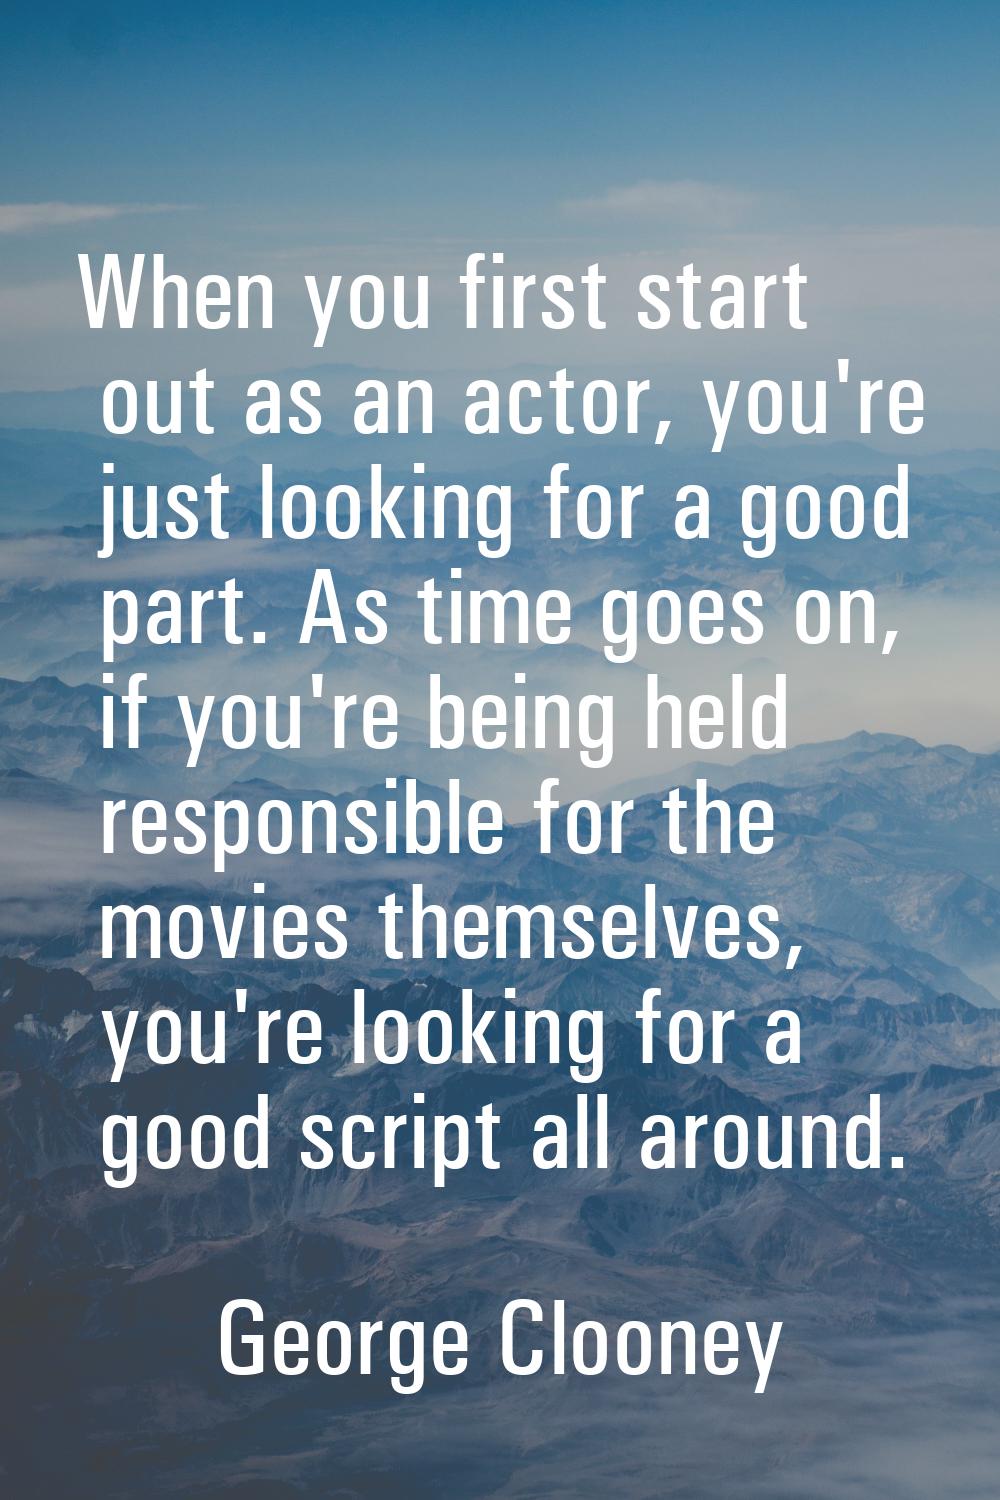 When you first start out as an actor, you're just looking for a good part. As time goes on, if you'